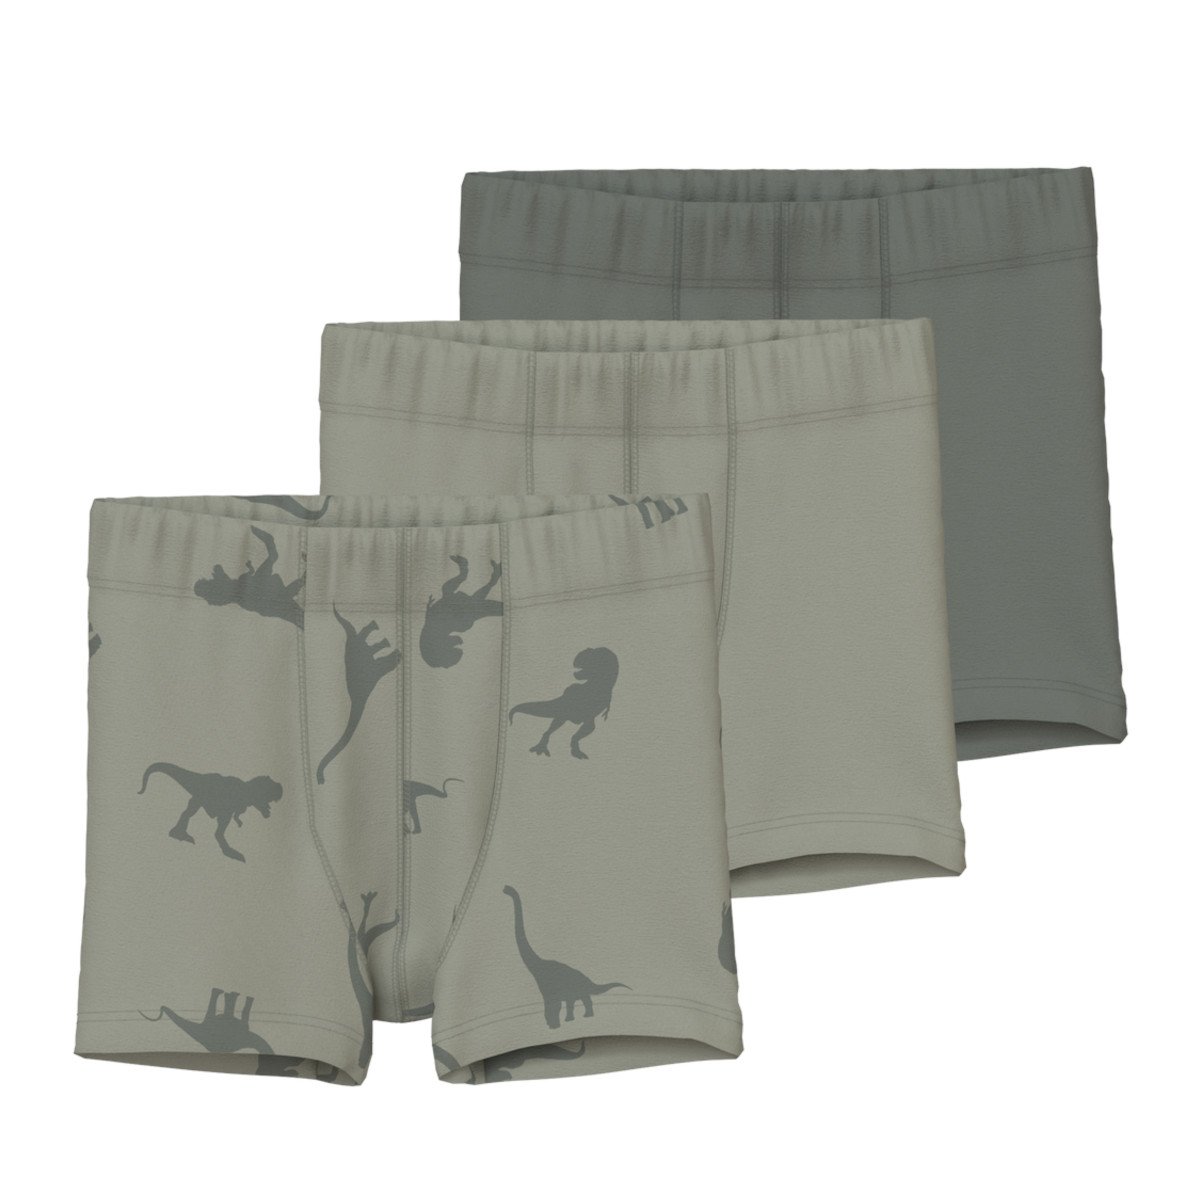 NAME IT NMMTIGHTS DINO boxerit 3kpl, Agave Green